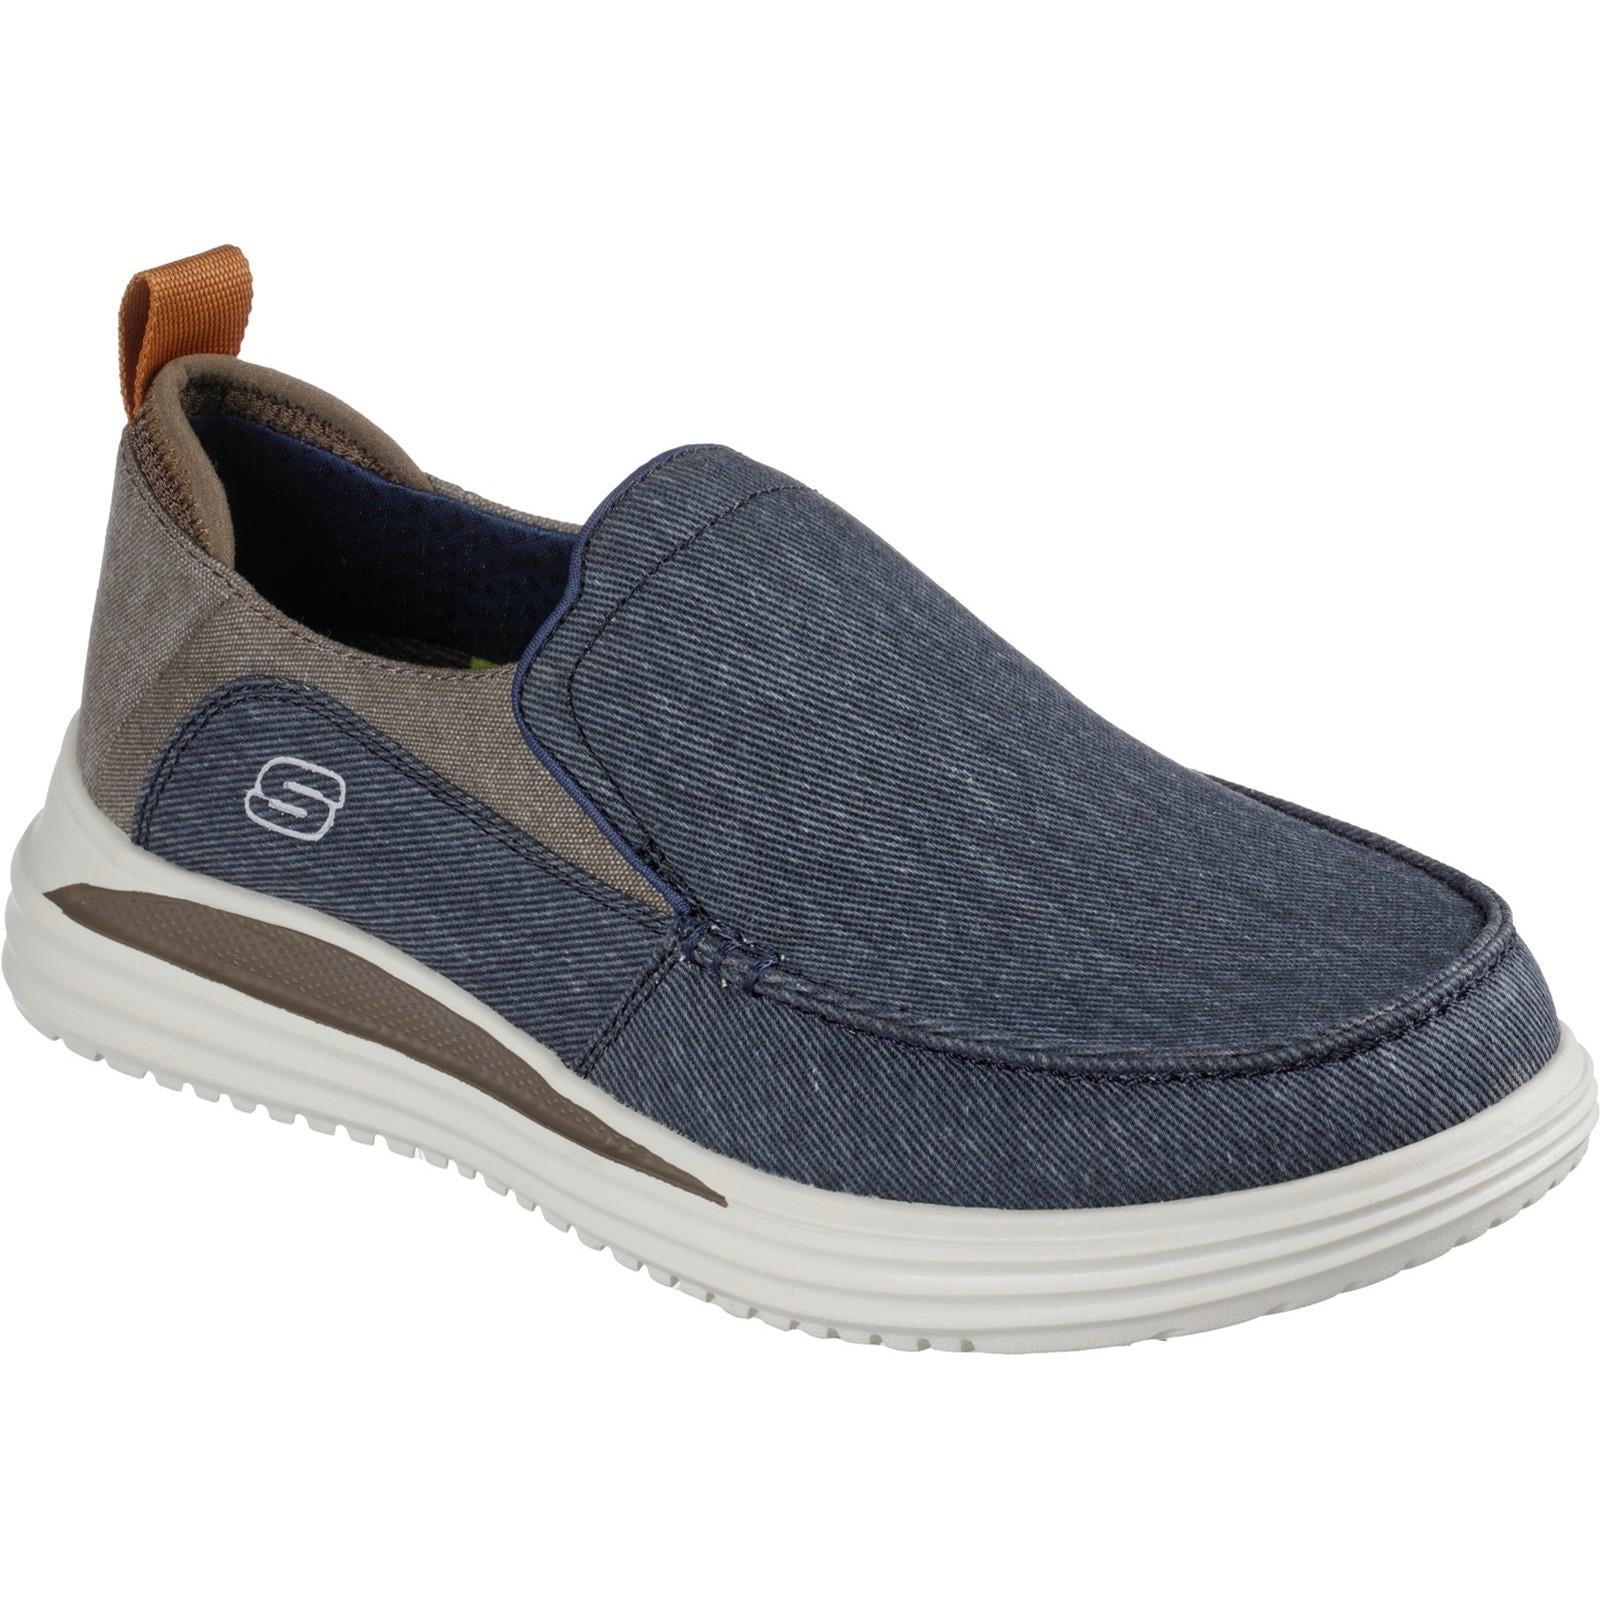 Skechers Proven Evers navy/brown men's canvas slip-on loafers shoes #204472